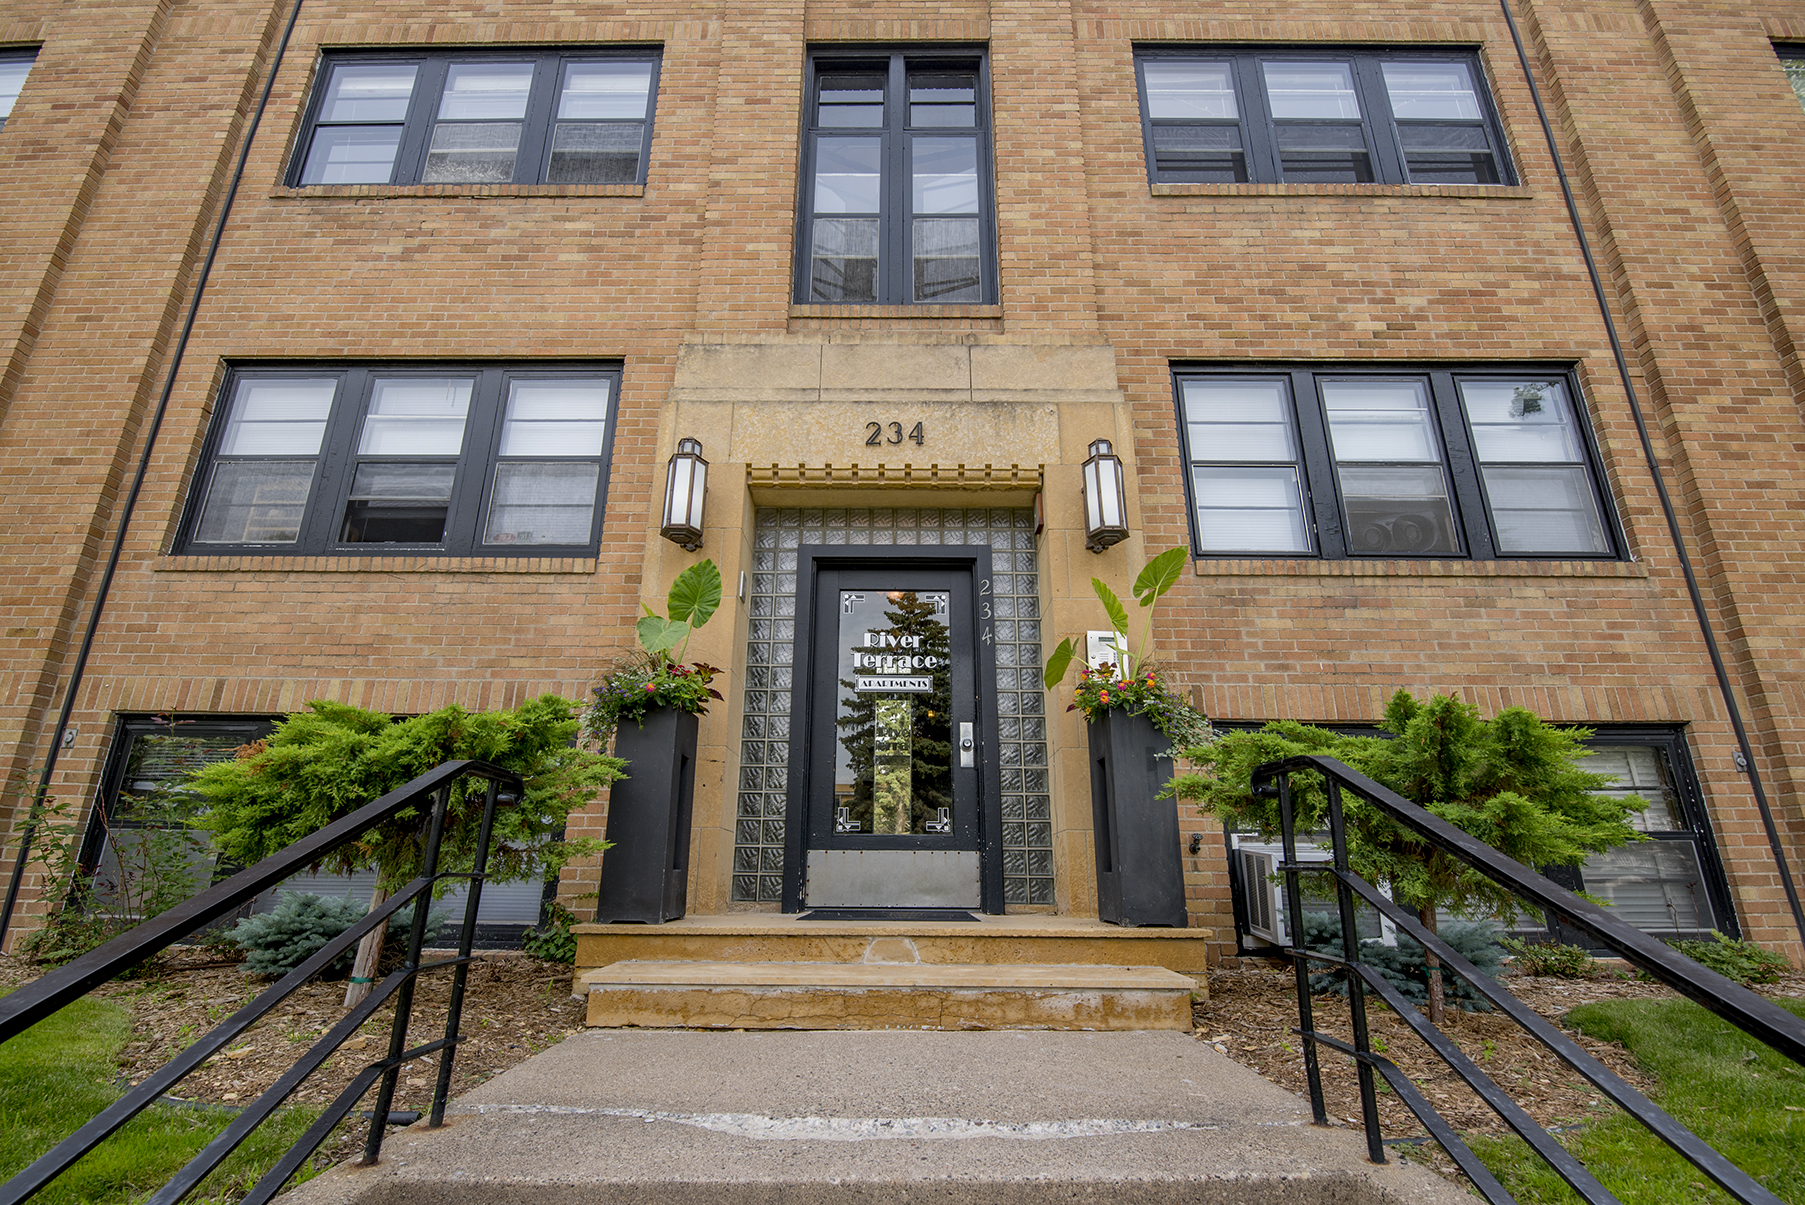 A great building in a great location - walk across the Lake Street Bridge in to Minneapolis, across the street to Town & Country or over to Summit Avenue!